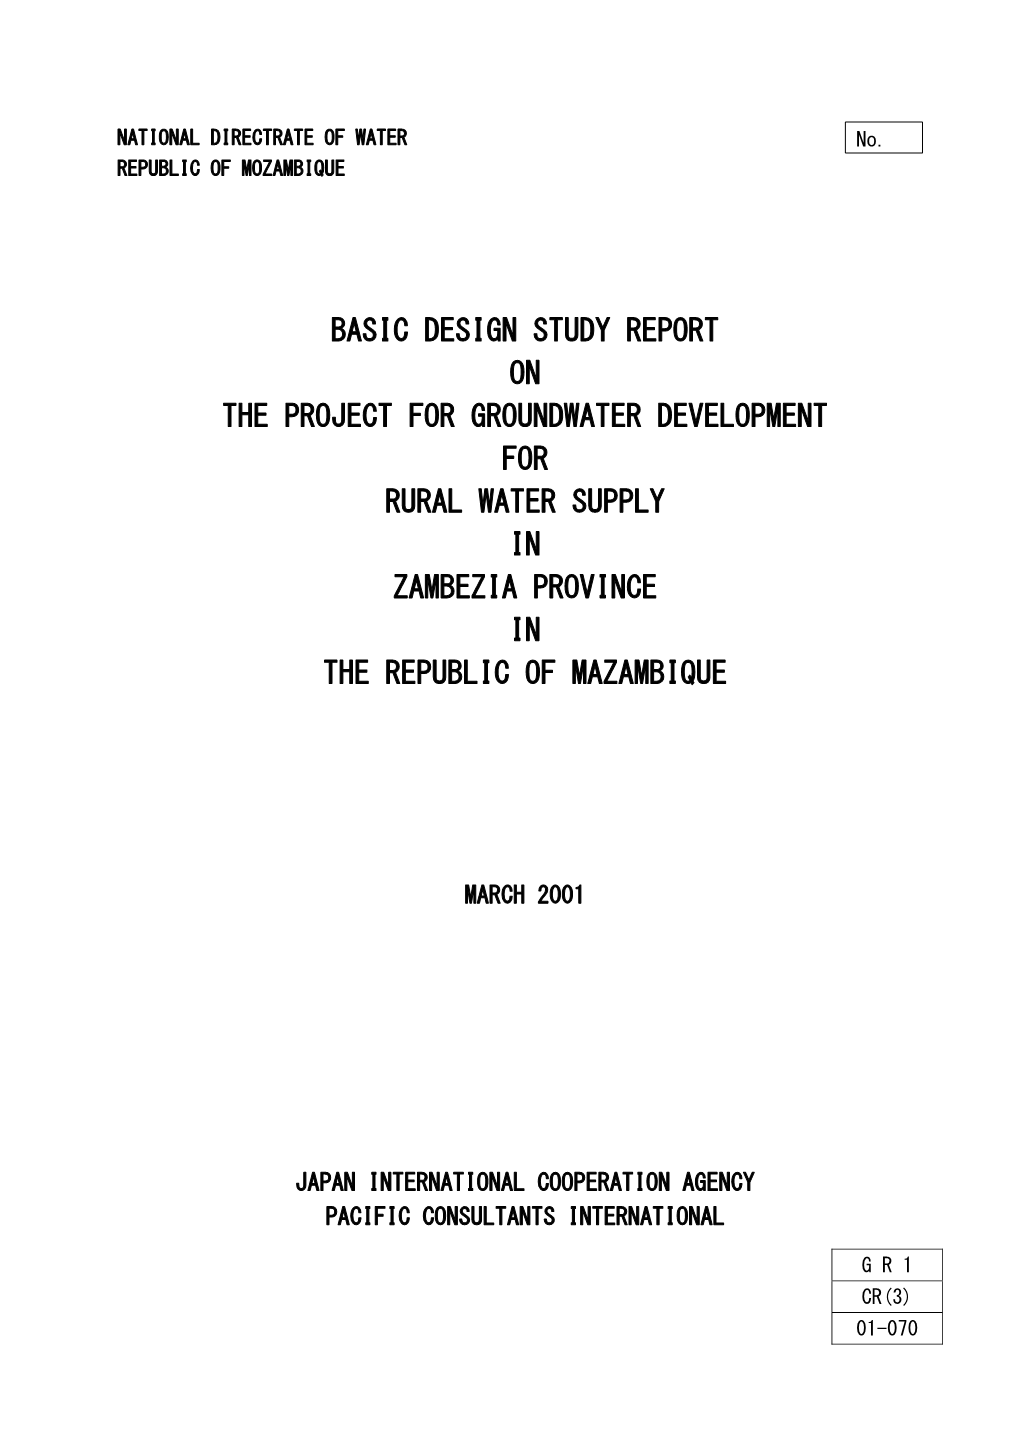 Basic Design Study Report on the Project for Groundwater Development for Rural Water Supply in Zambezia Province in the Republic of Mazambique